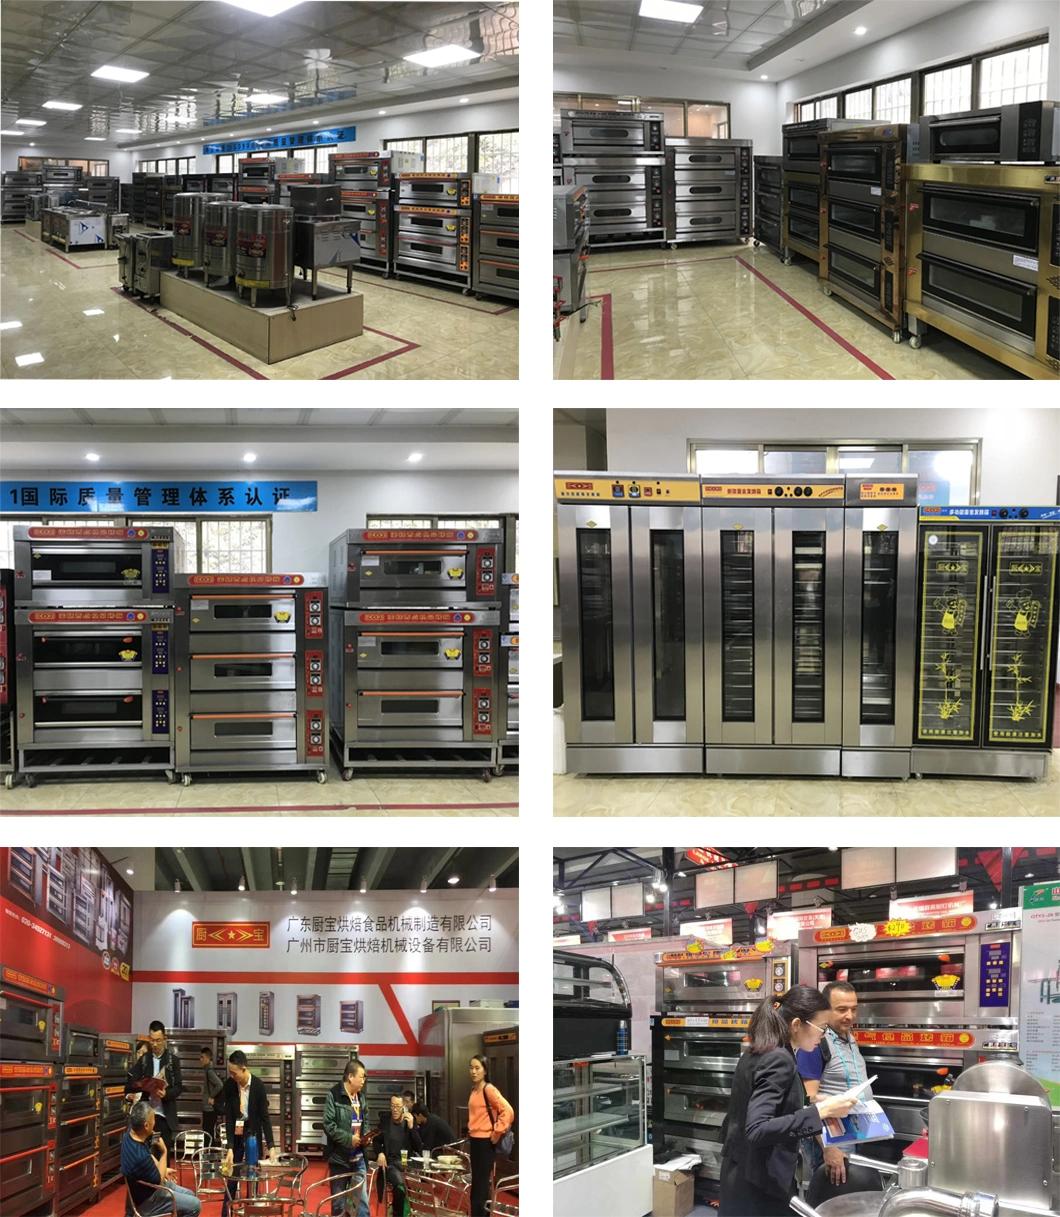 3 Deck 9 Tray Electirc Oven for Commercial Kitchen Baking Equipment Bakery Machine Bread Machinery